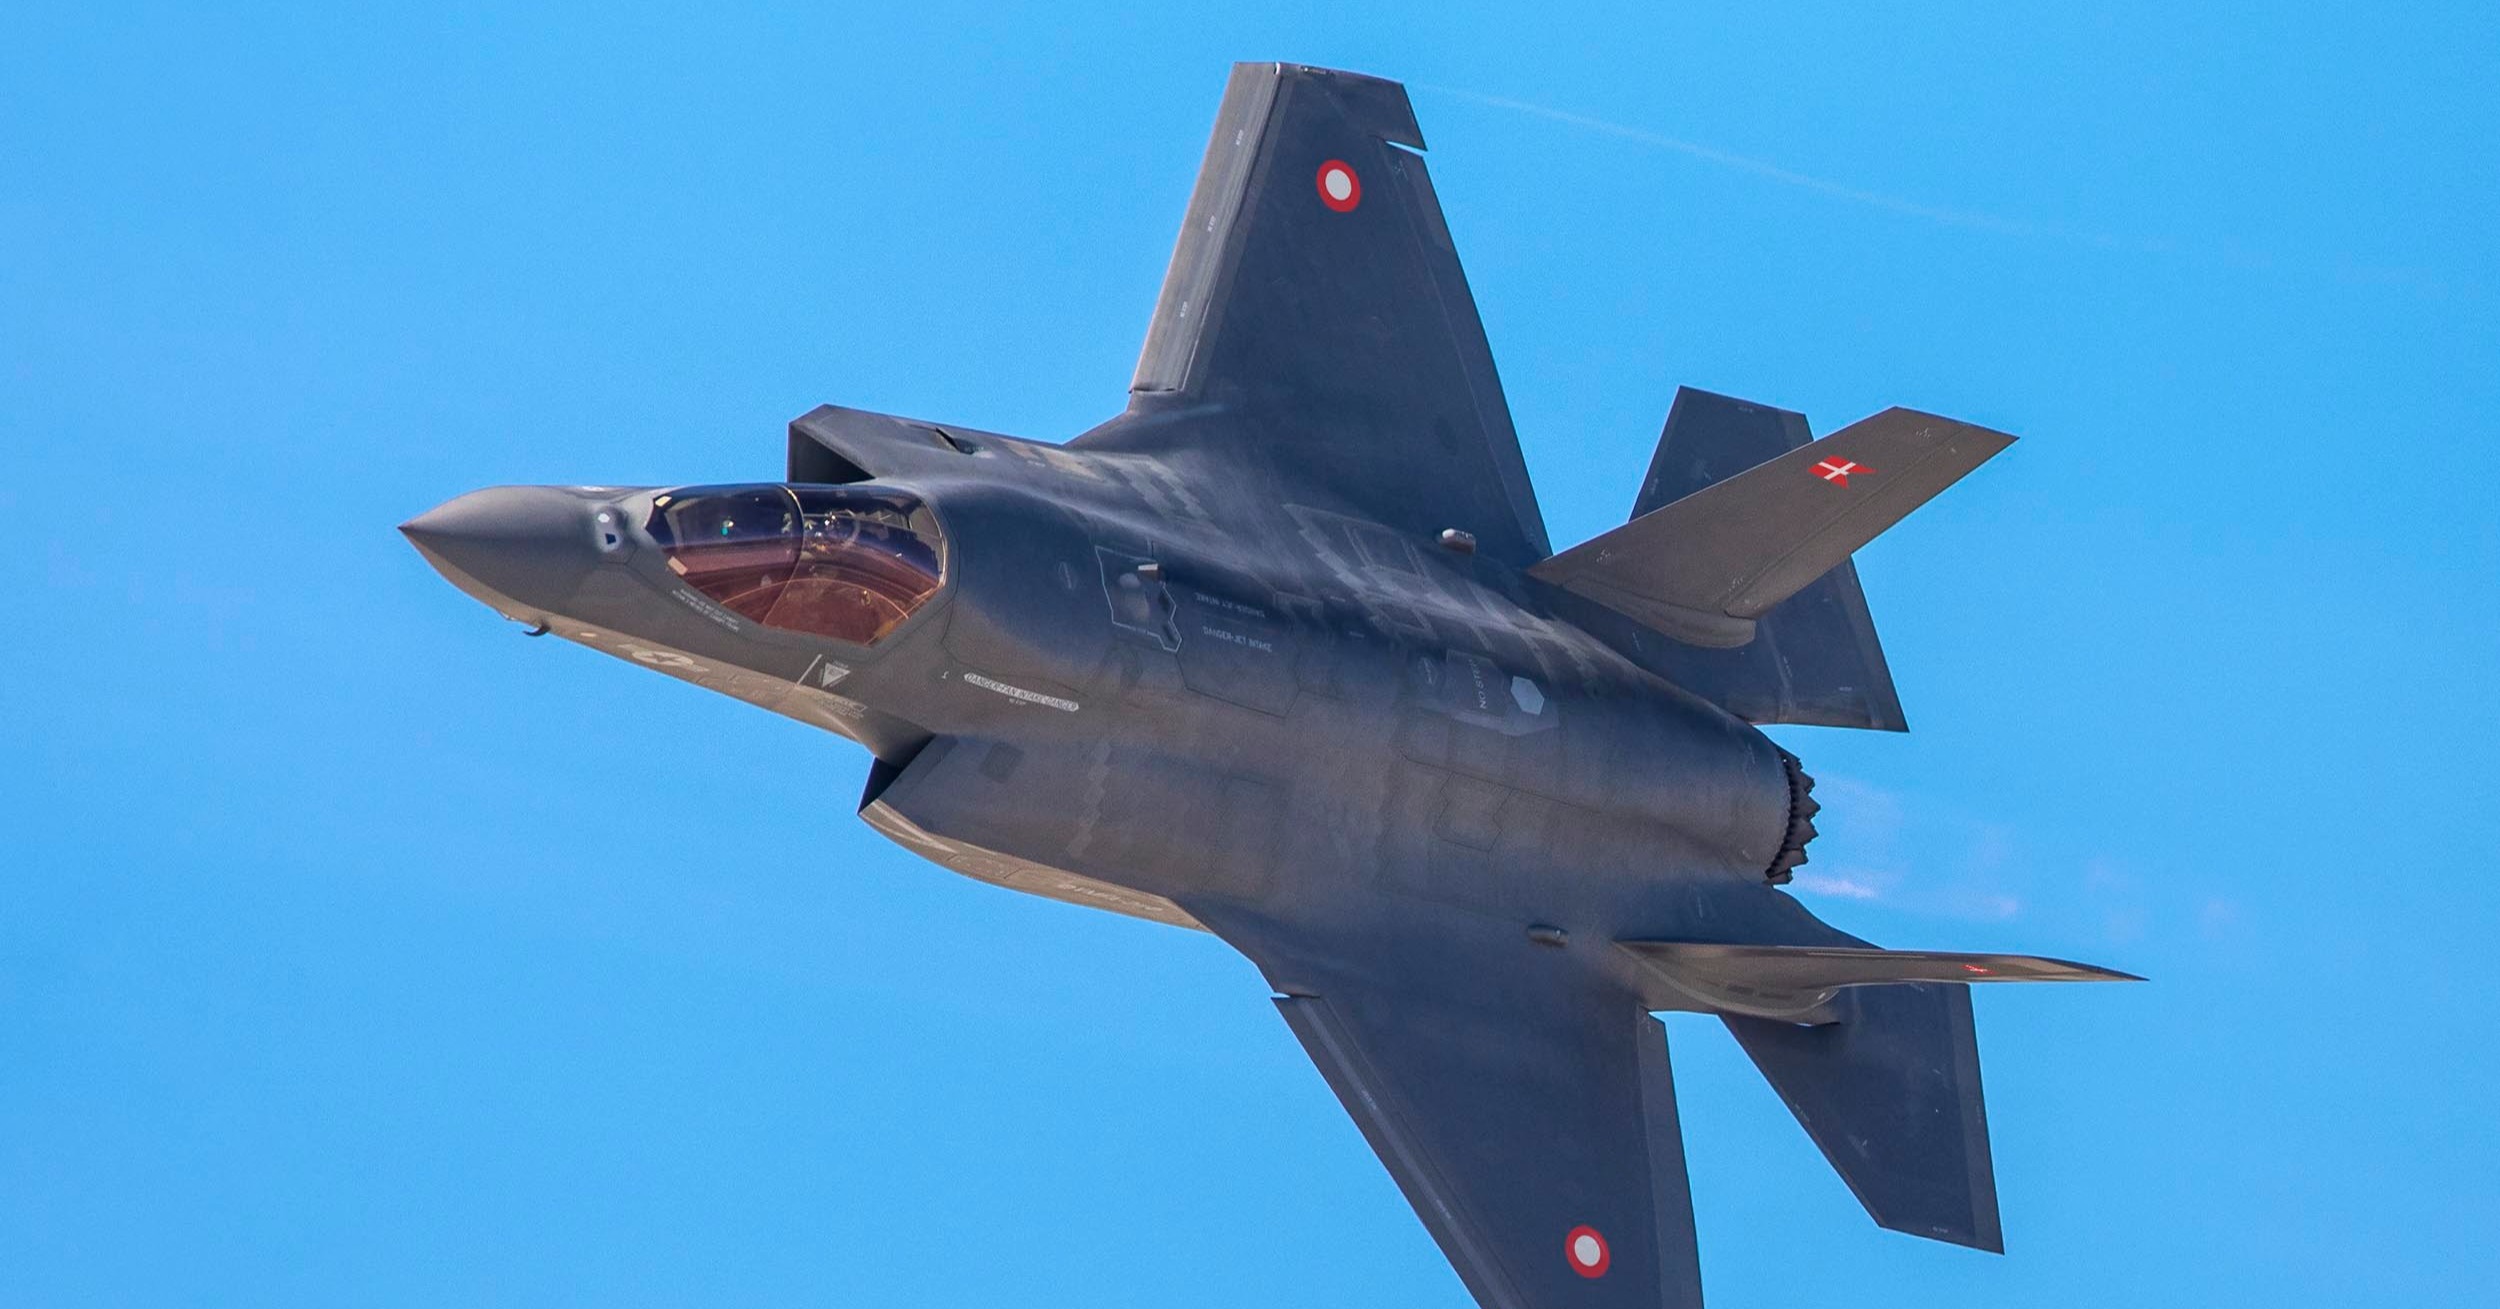 A proud subcontractor to Lockheed Martin's F-35 Joint Strike Fighter.